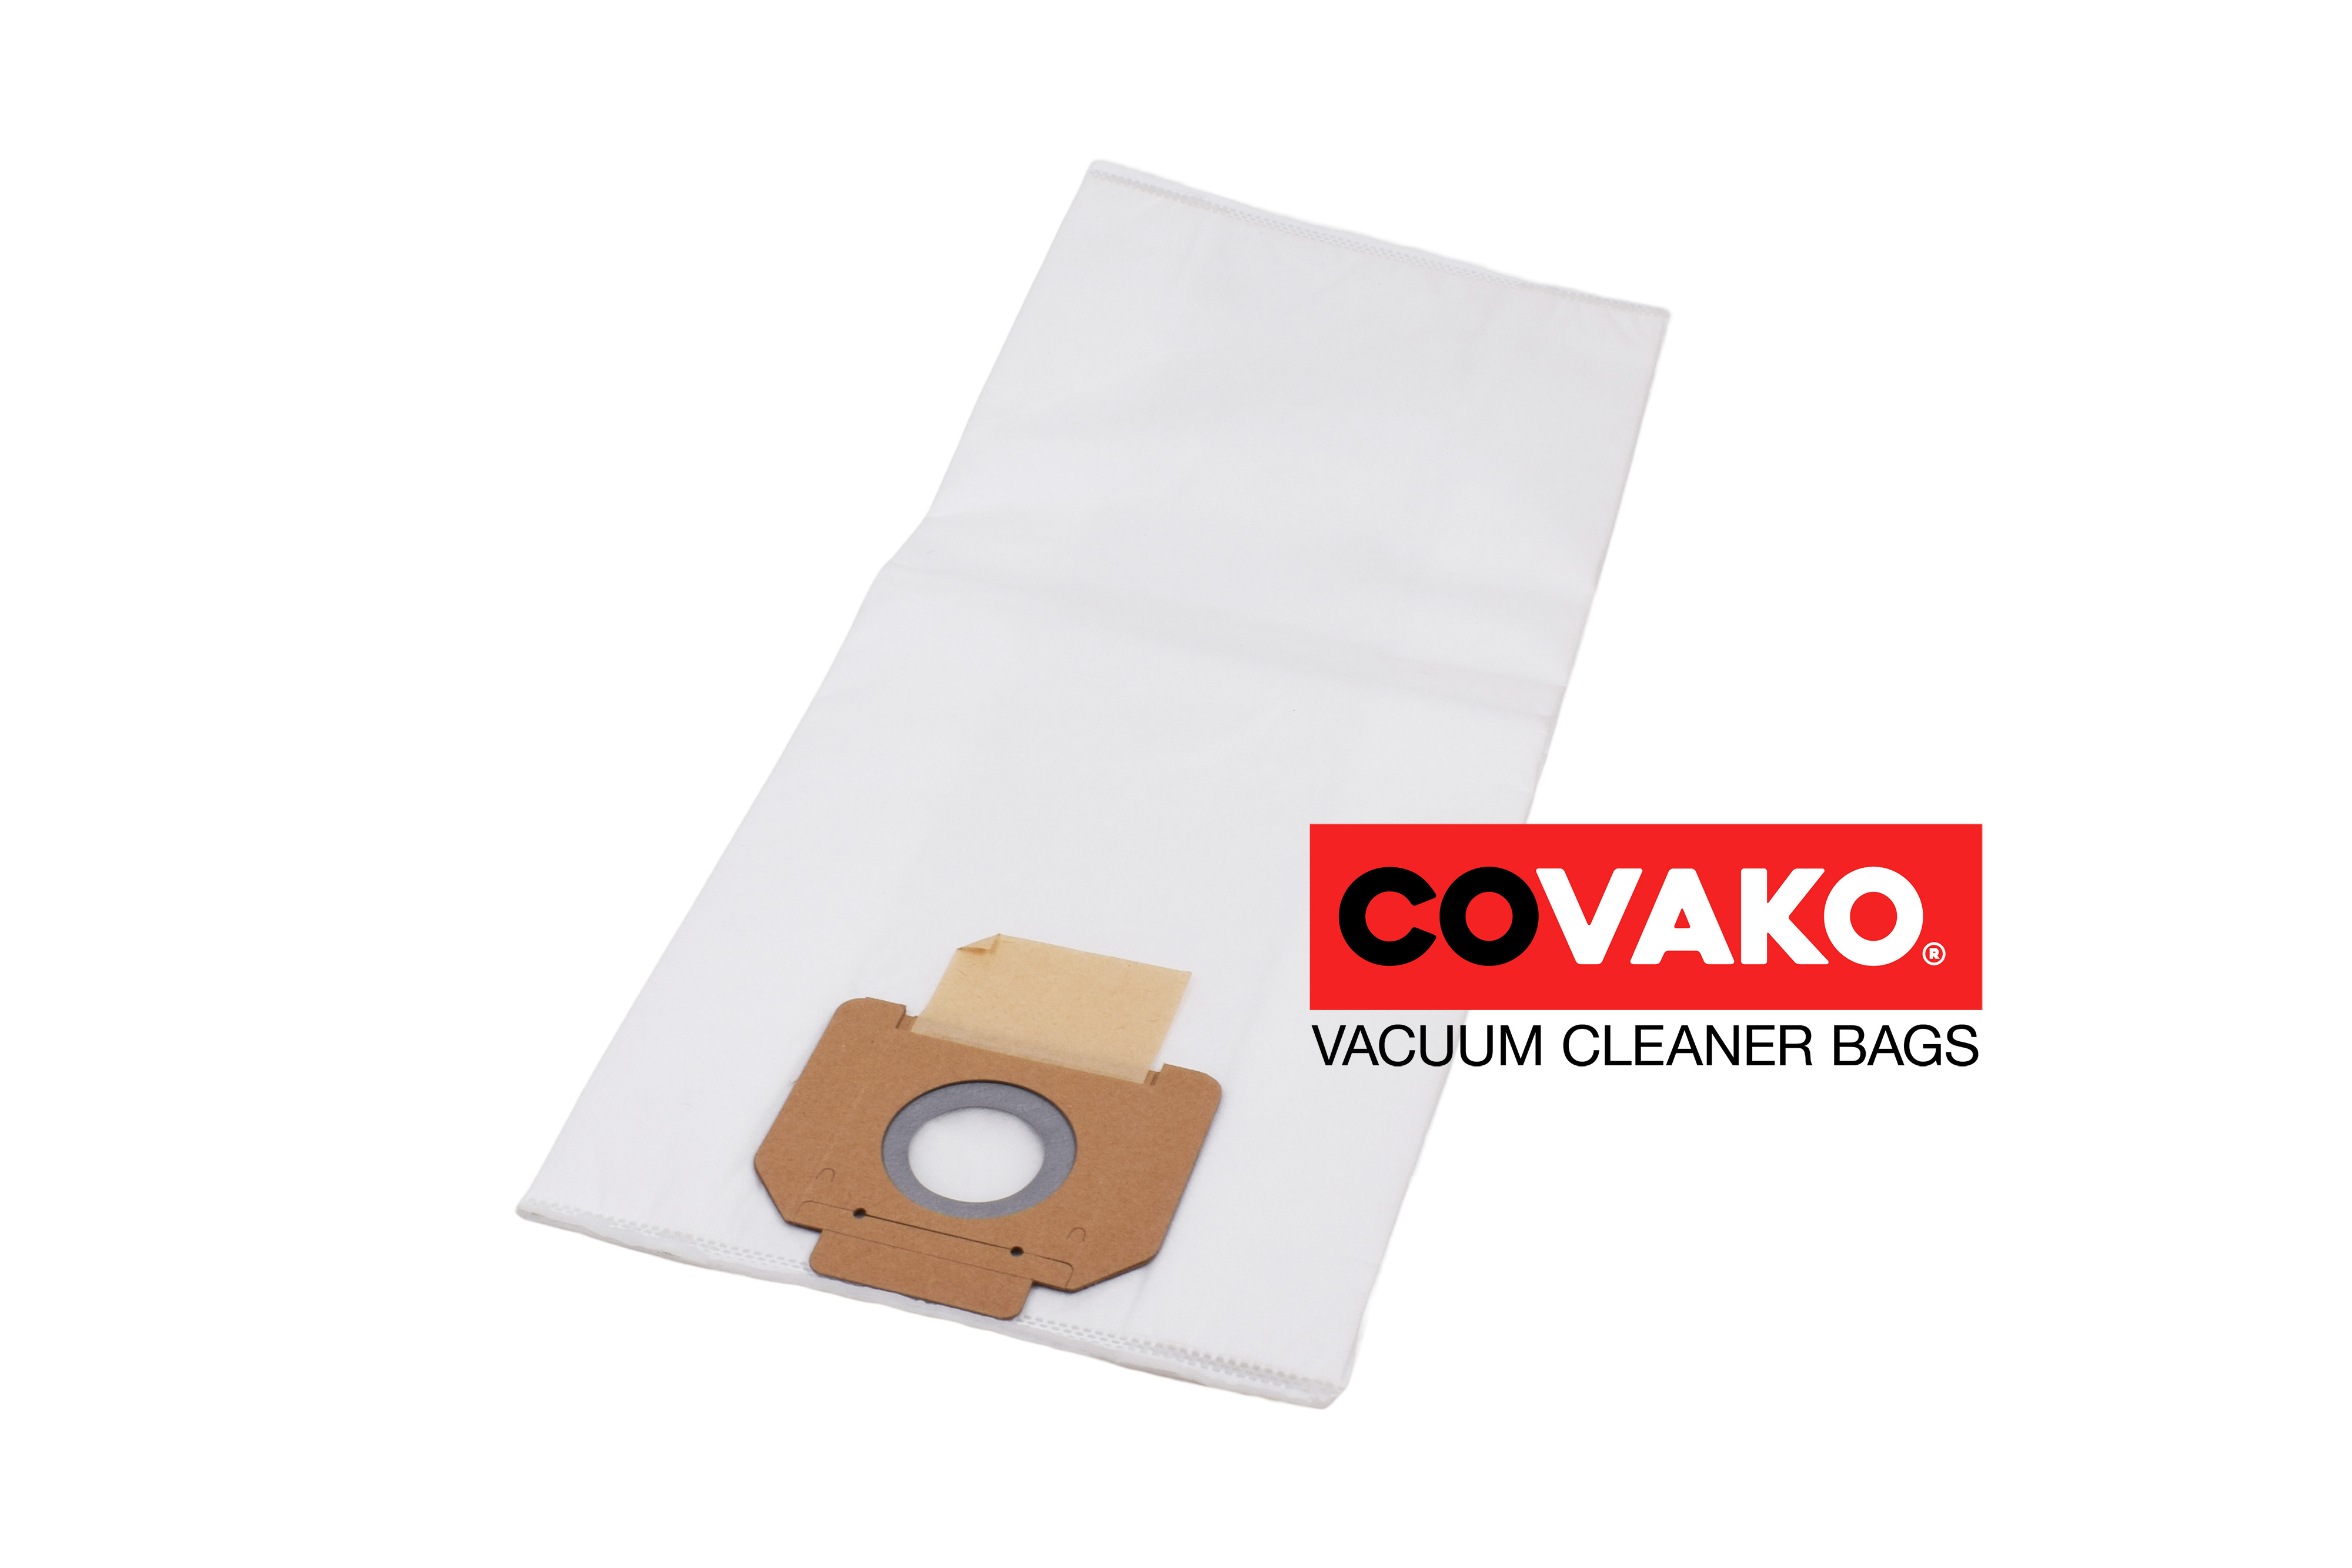 Tennant V 12 / Synthesis - Tennant vacuum cleaner bags